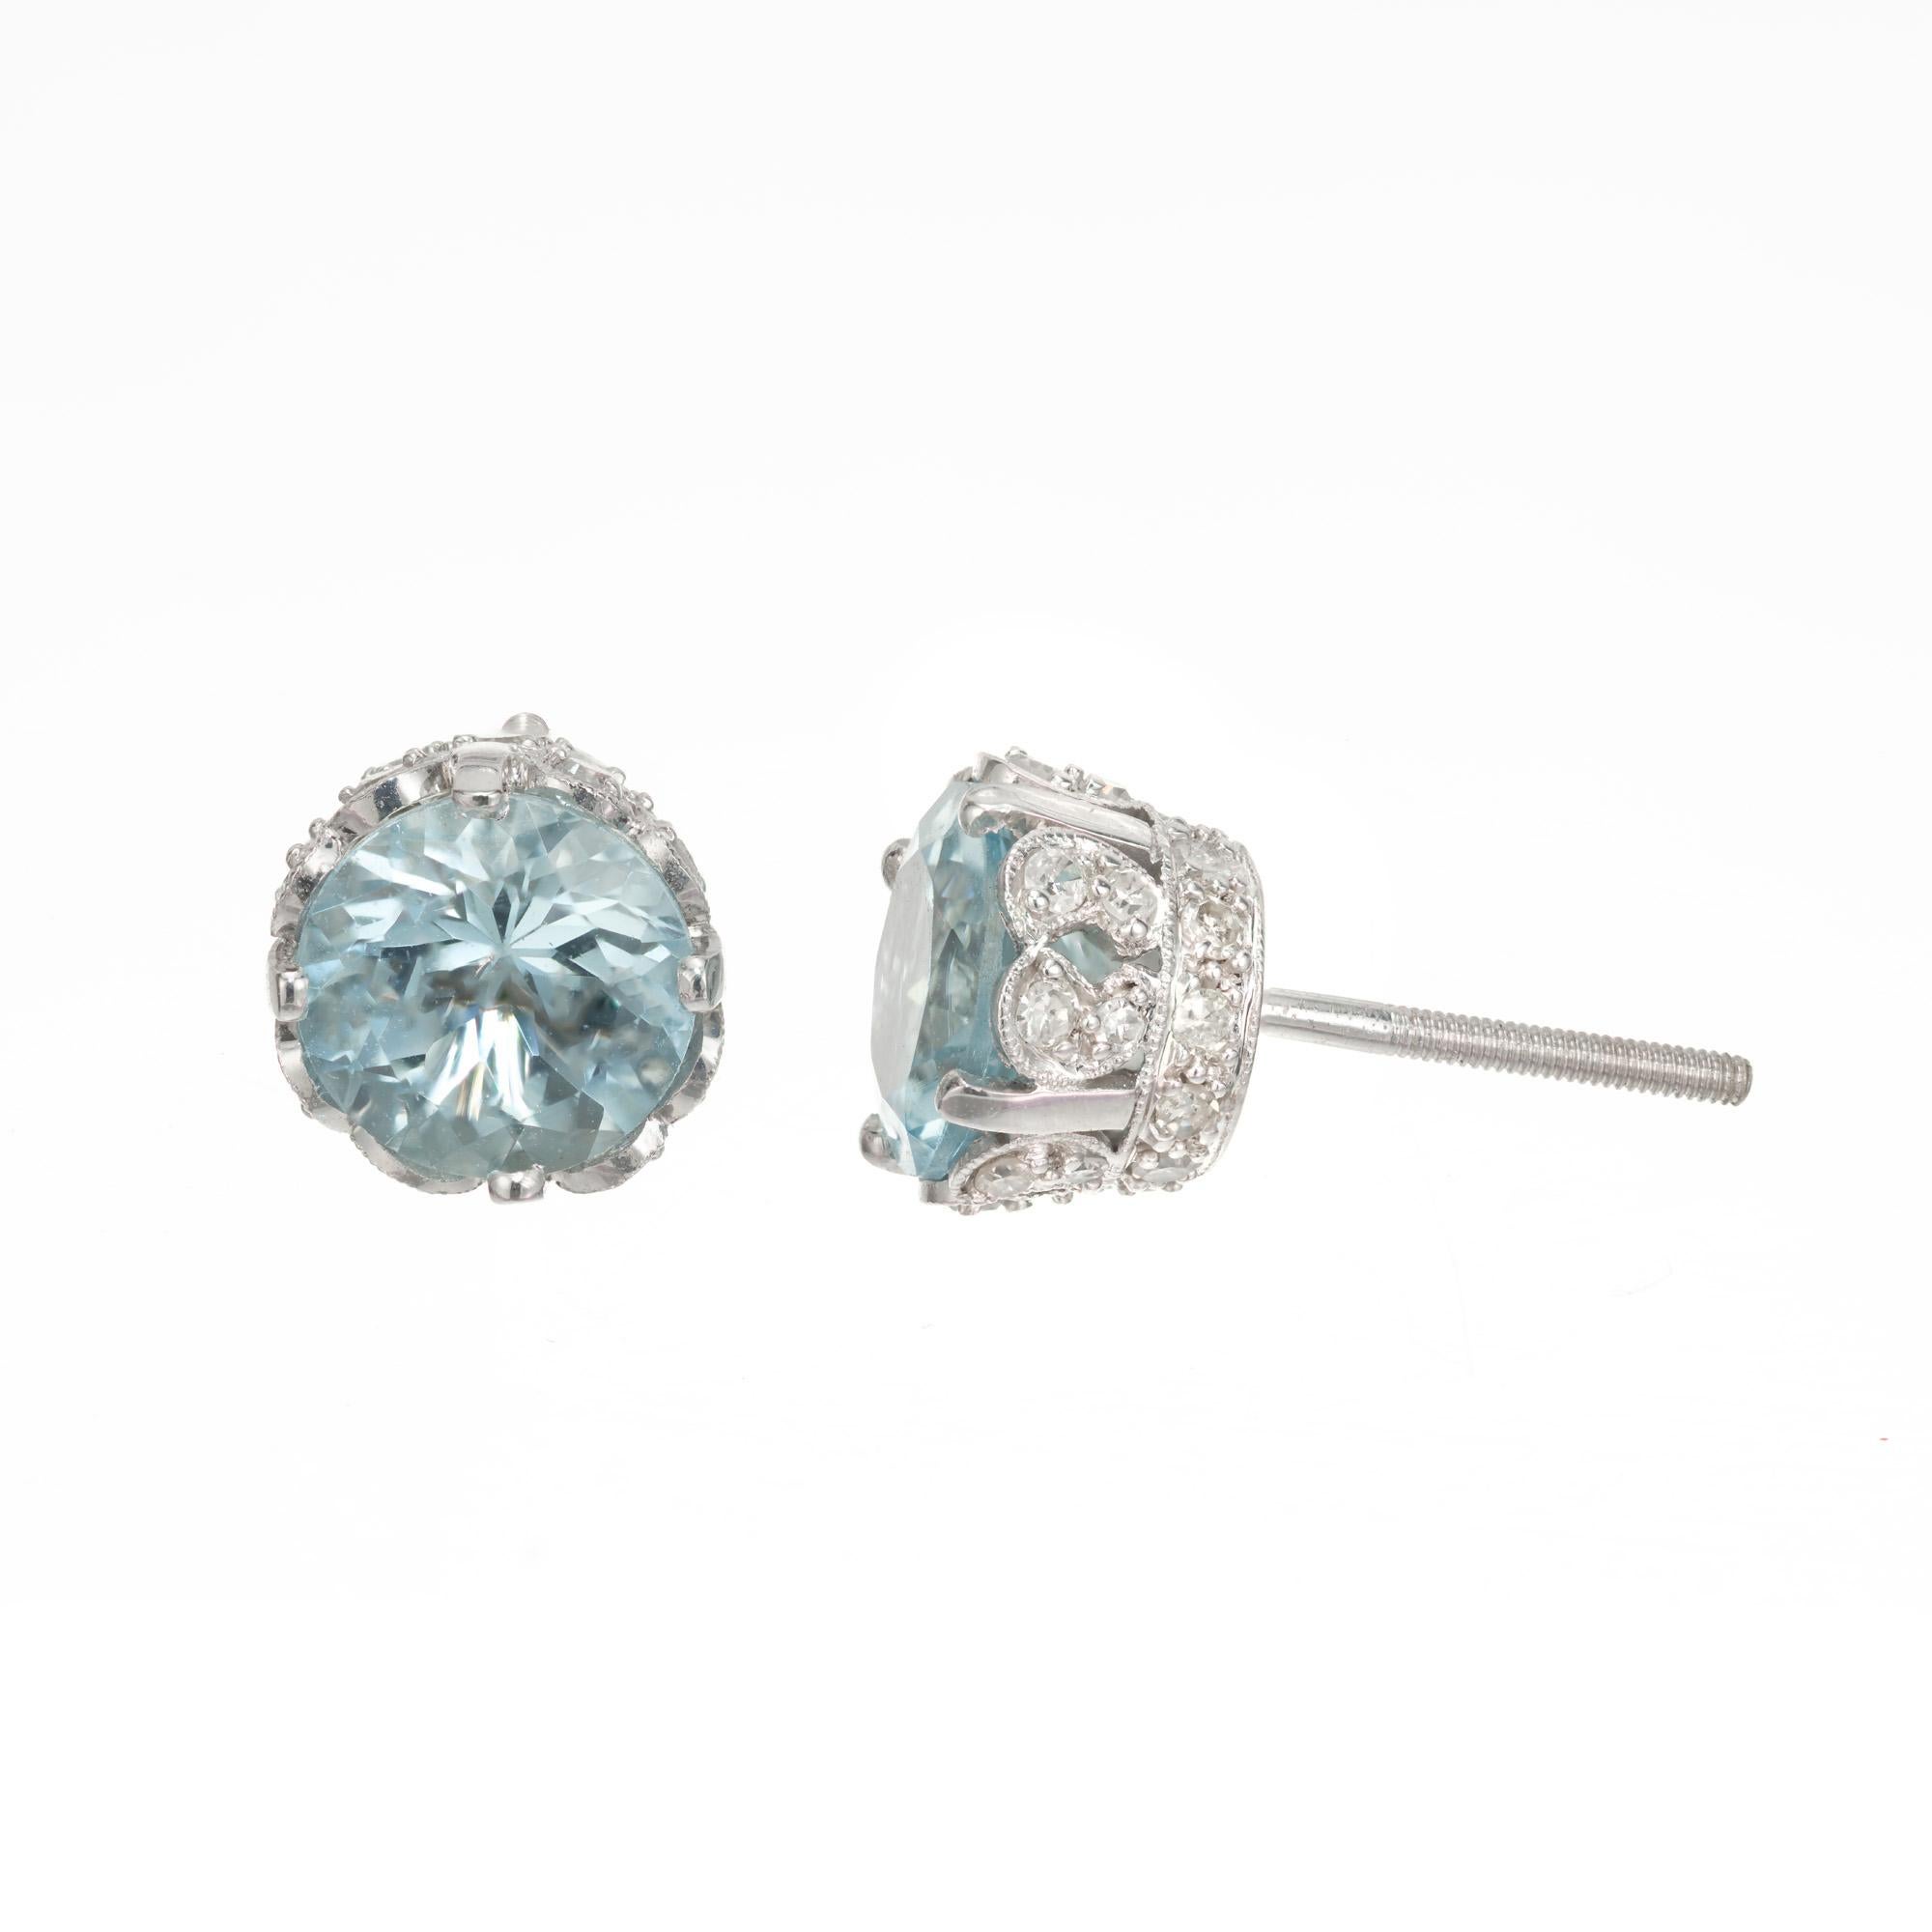 Peter Suchy 2.34 Carat Aquamarines Diamond White Gold Stud Earrings In New Condition For Sale In Stamford, CT